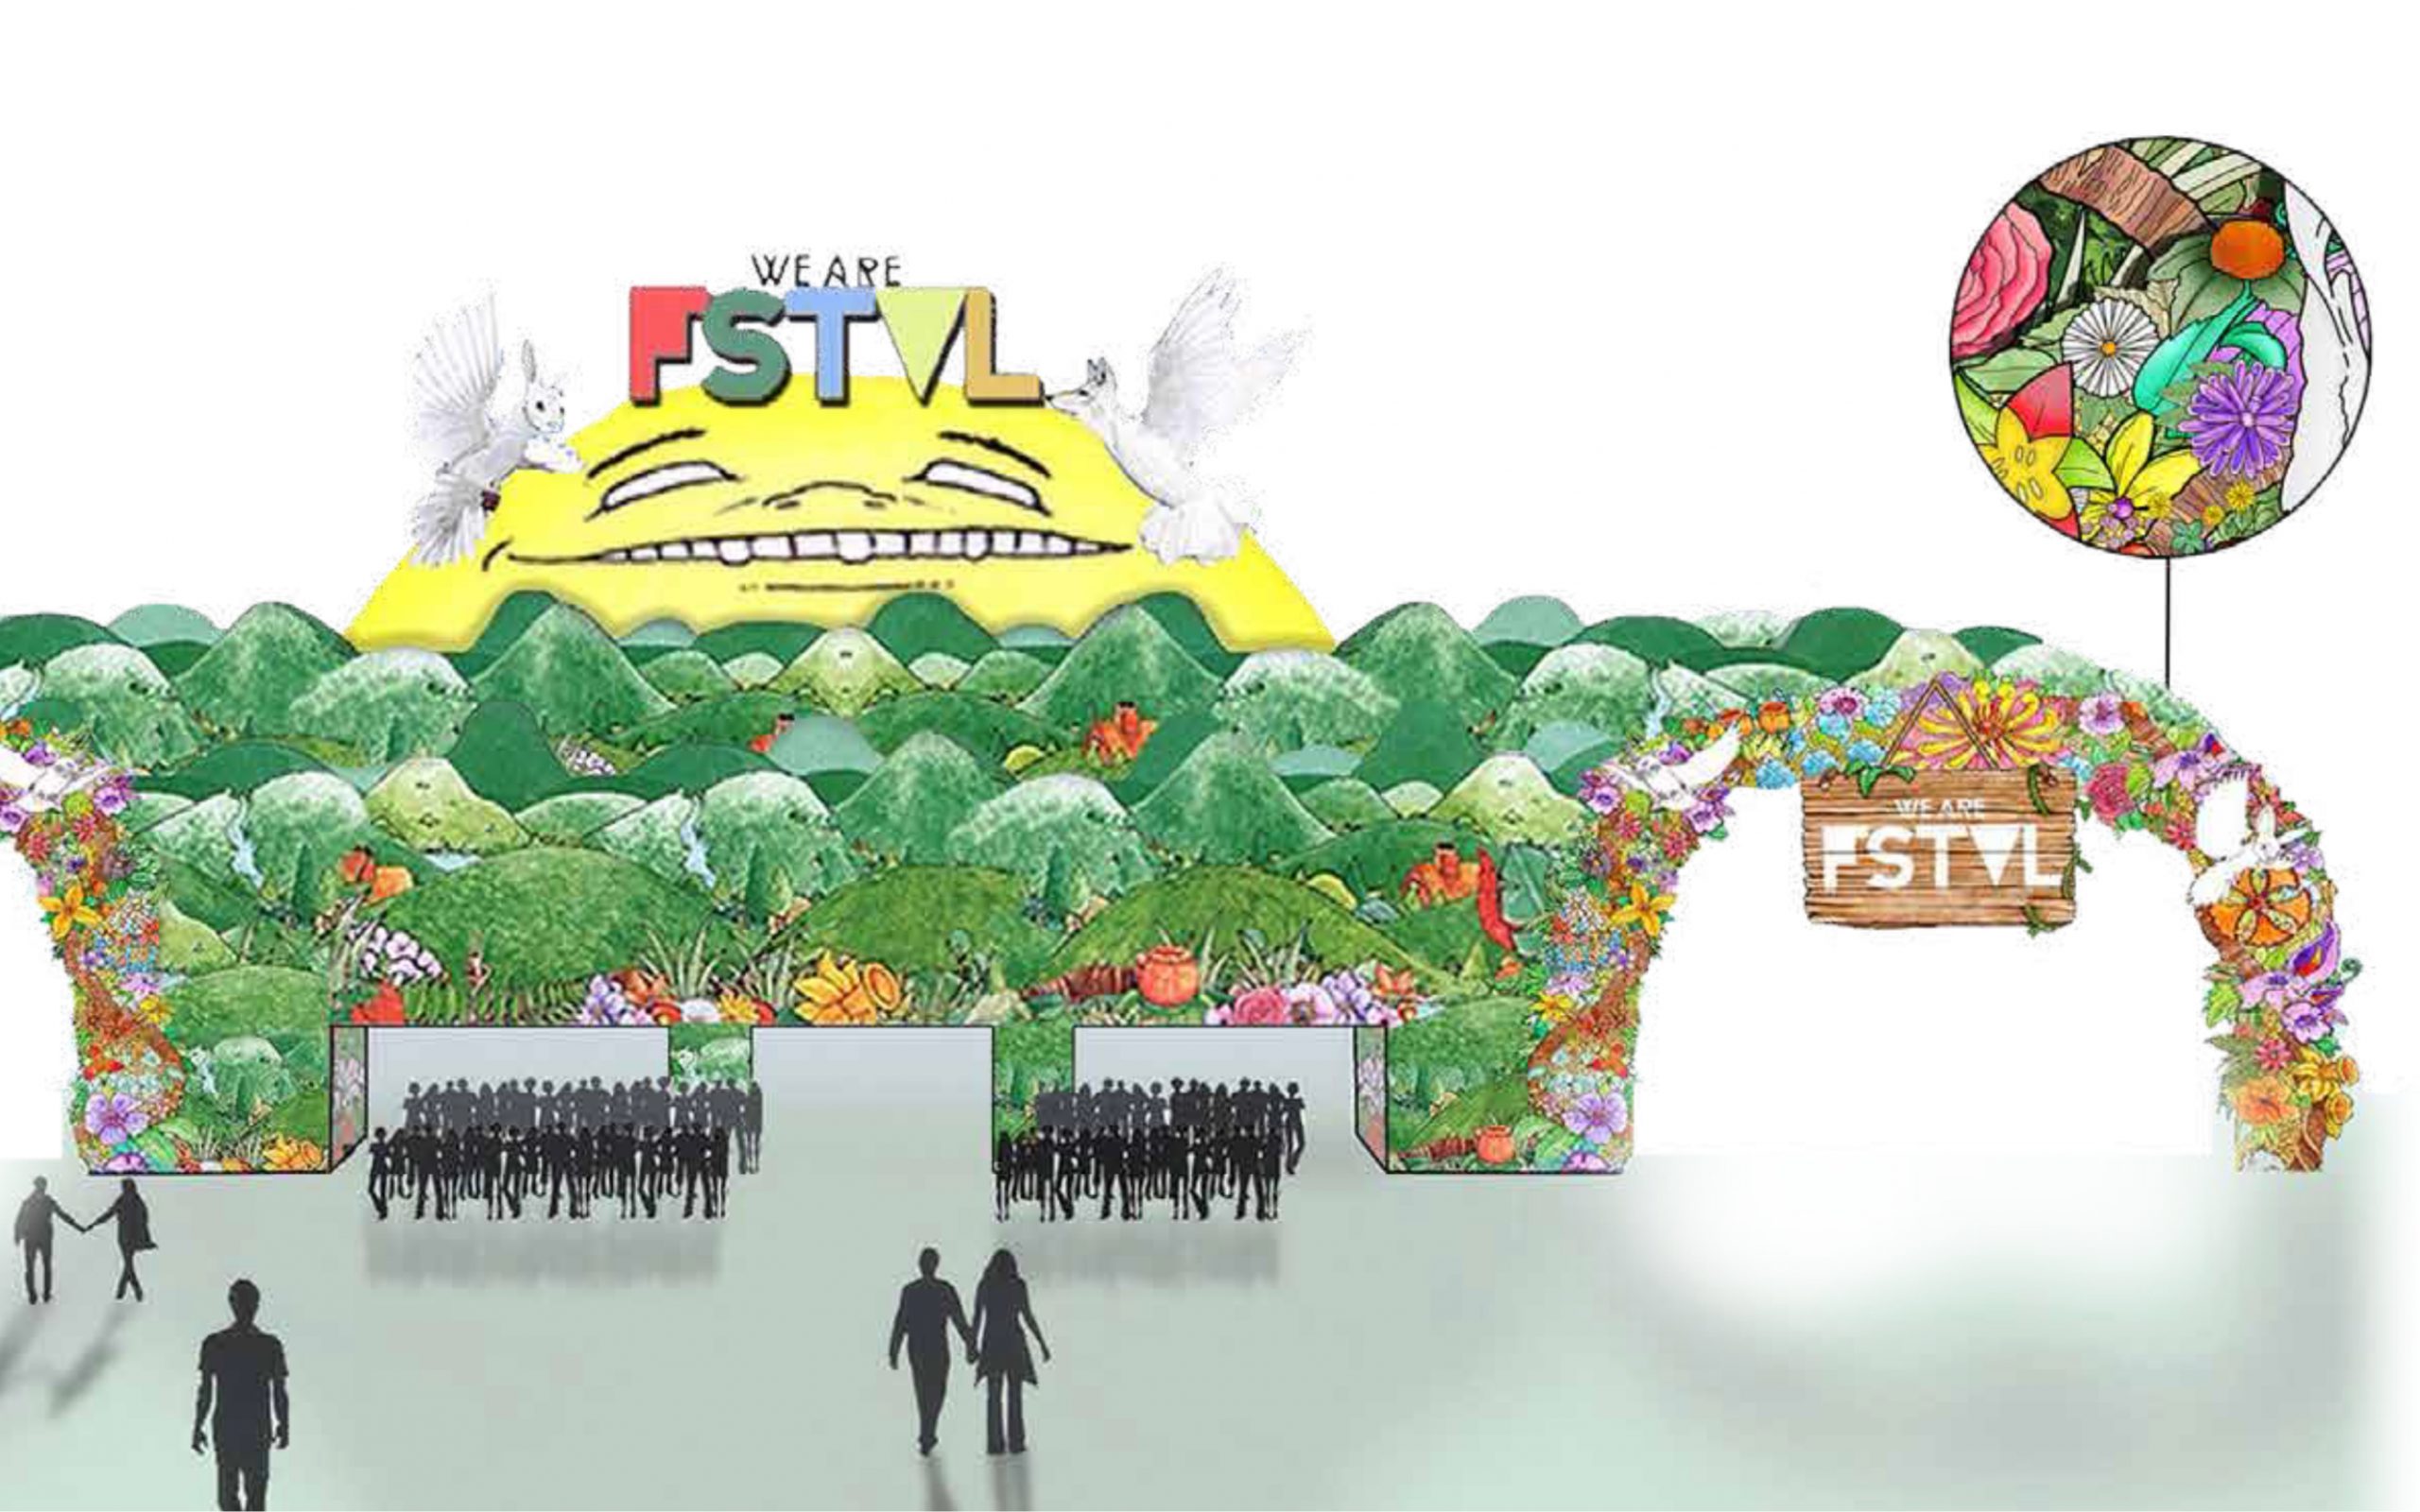 A drawing of We Are Fstvl that includes plants and trees